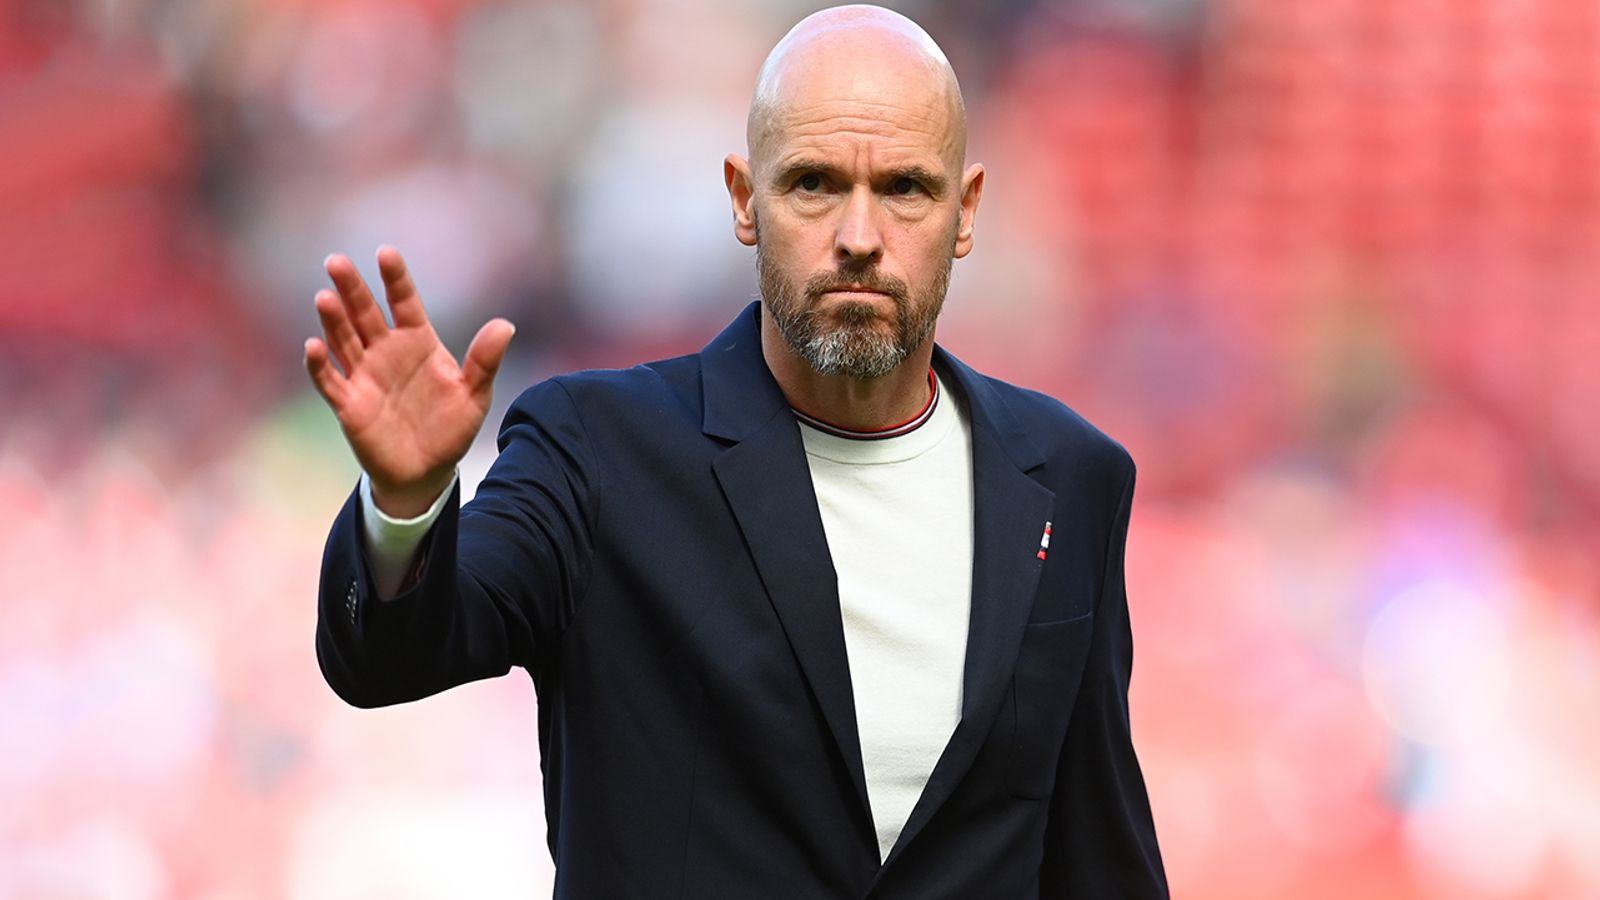 Manchester United manager Erik ten Hag need to find ways to turn things around